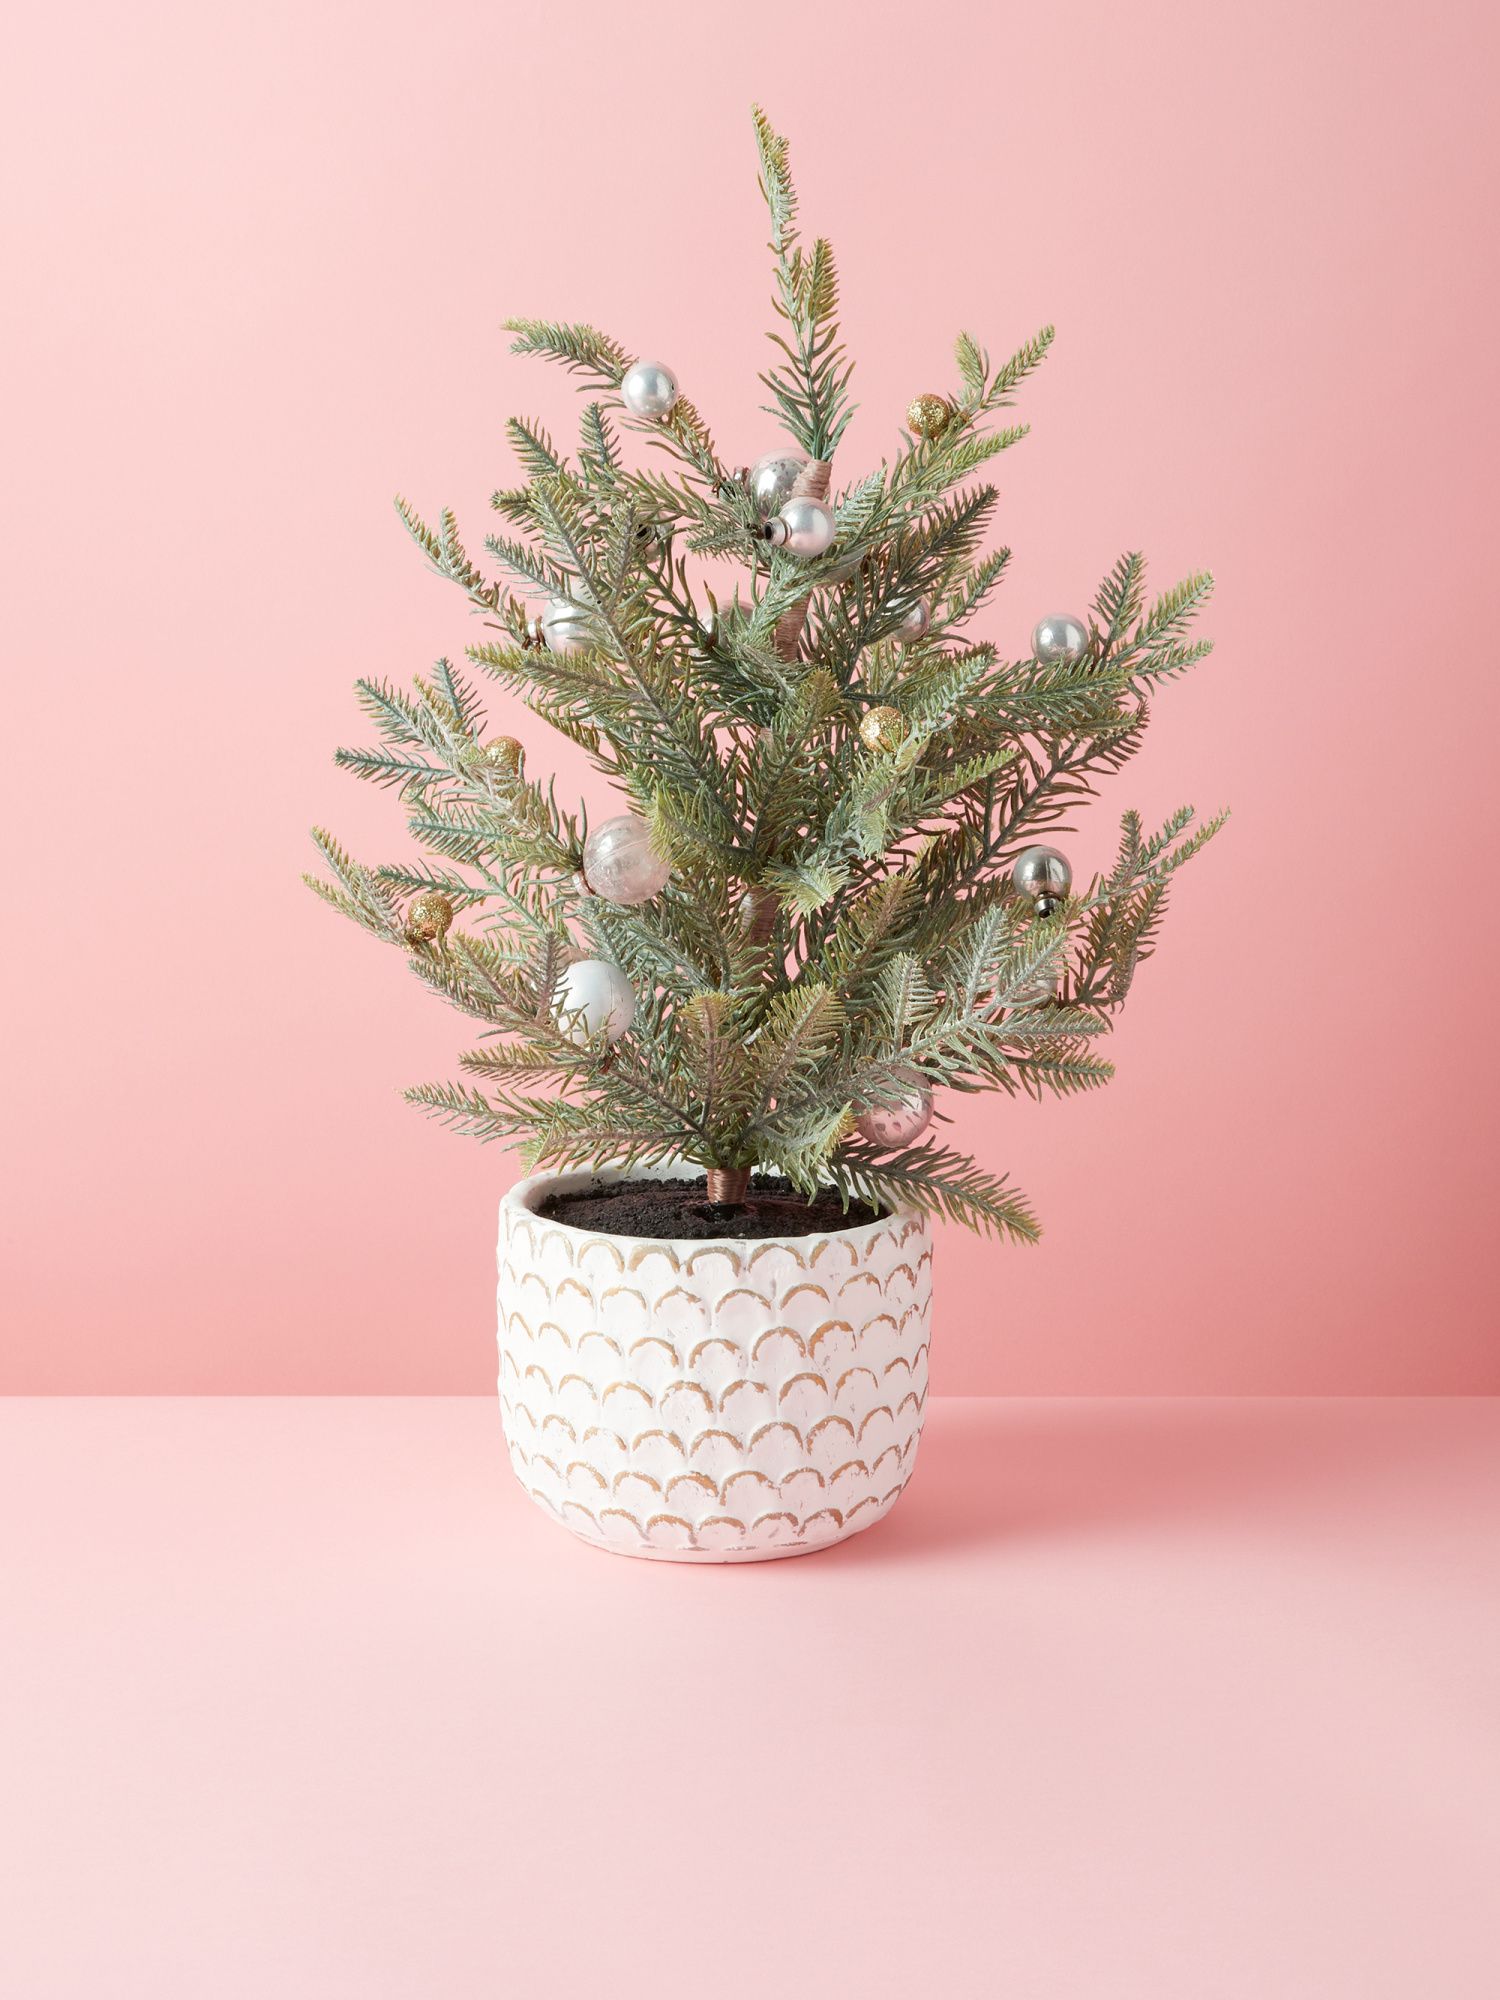 19in Artificial Pine Tree With Ornaments | HomeGoods